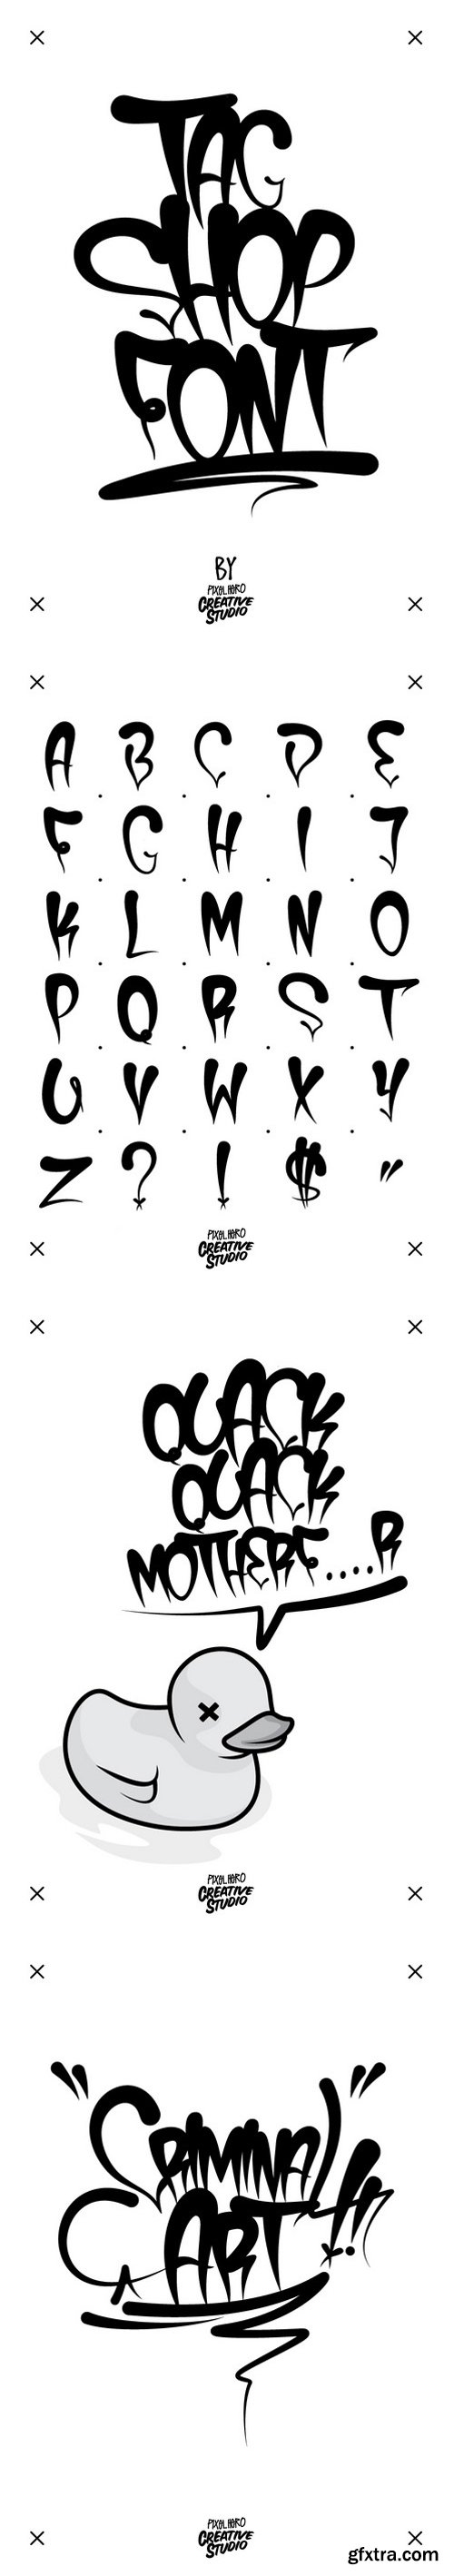 TaggShop Typeface